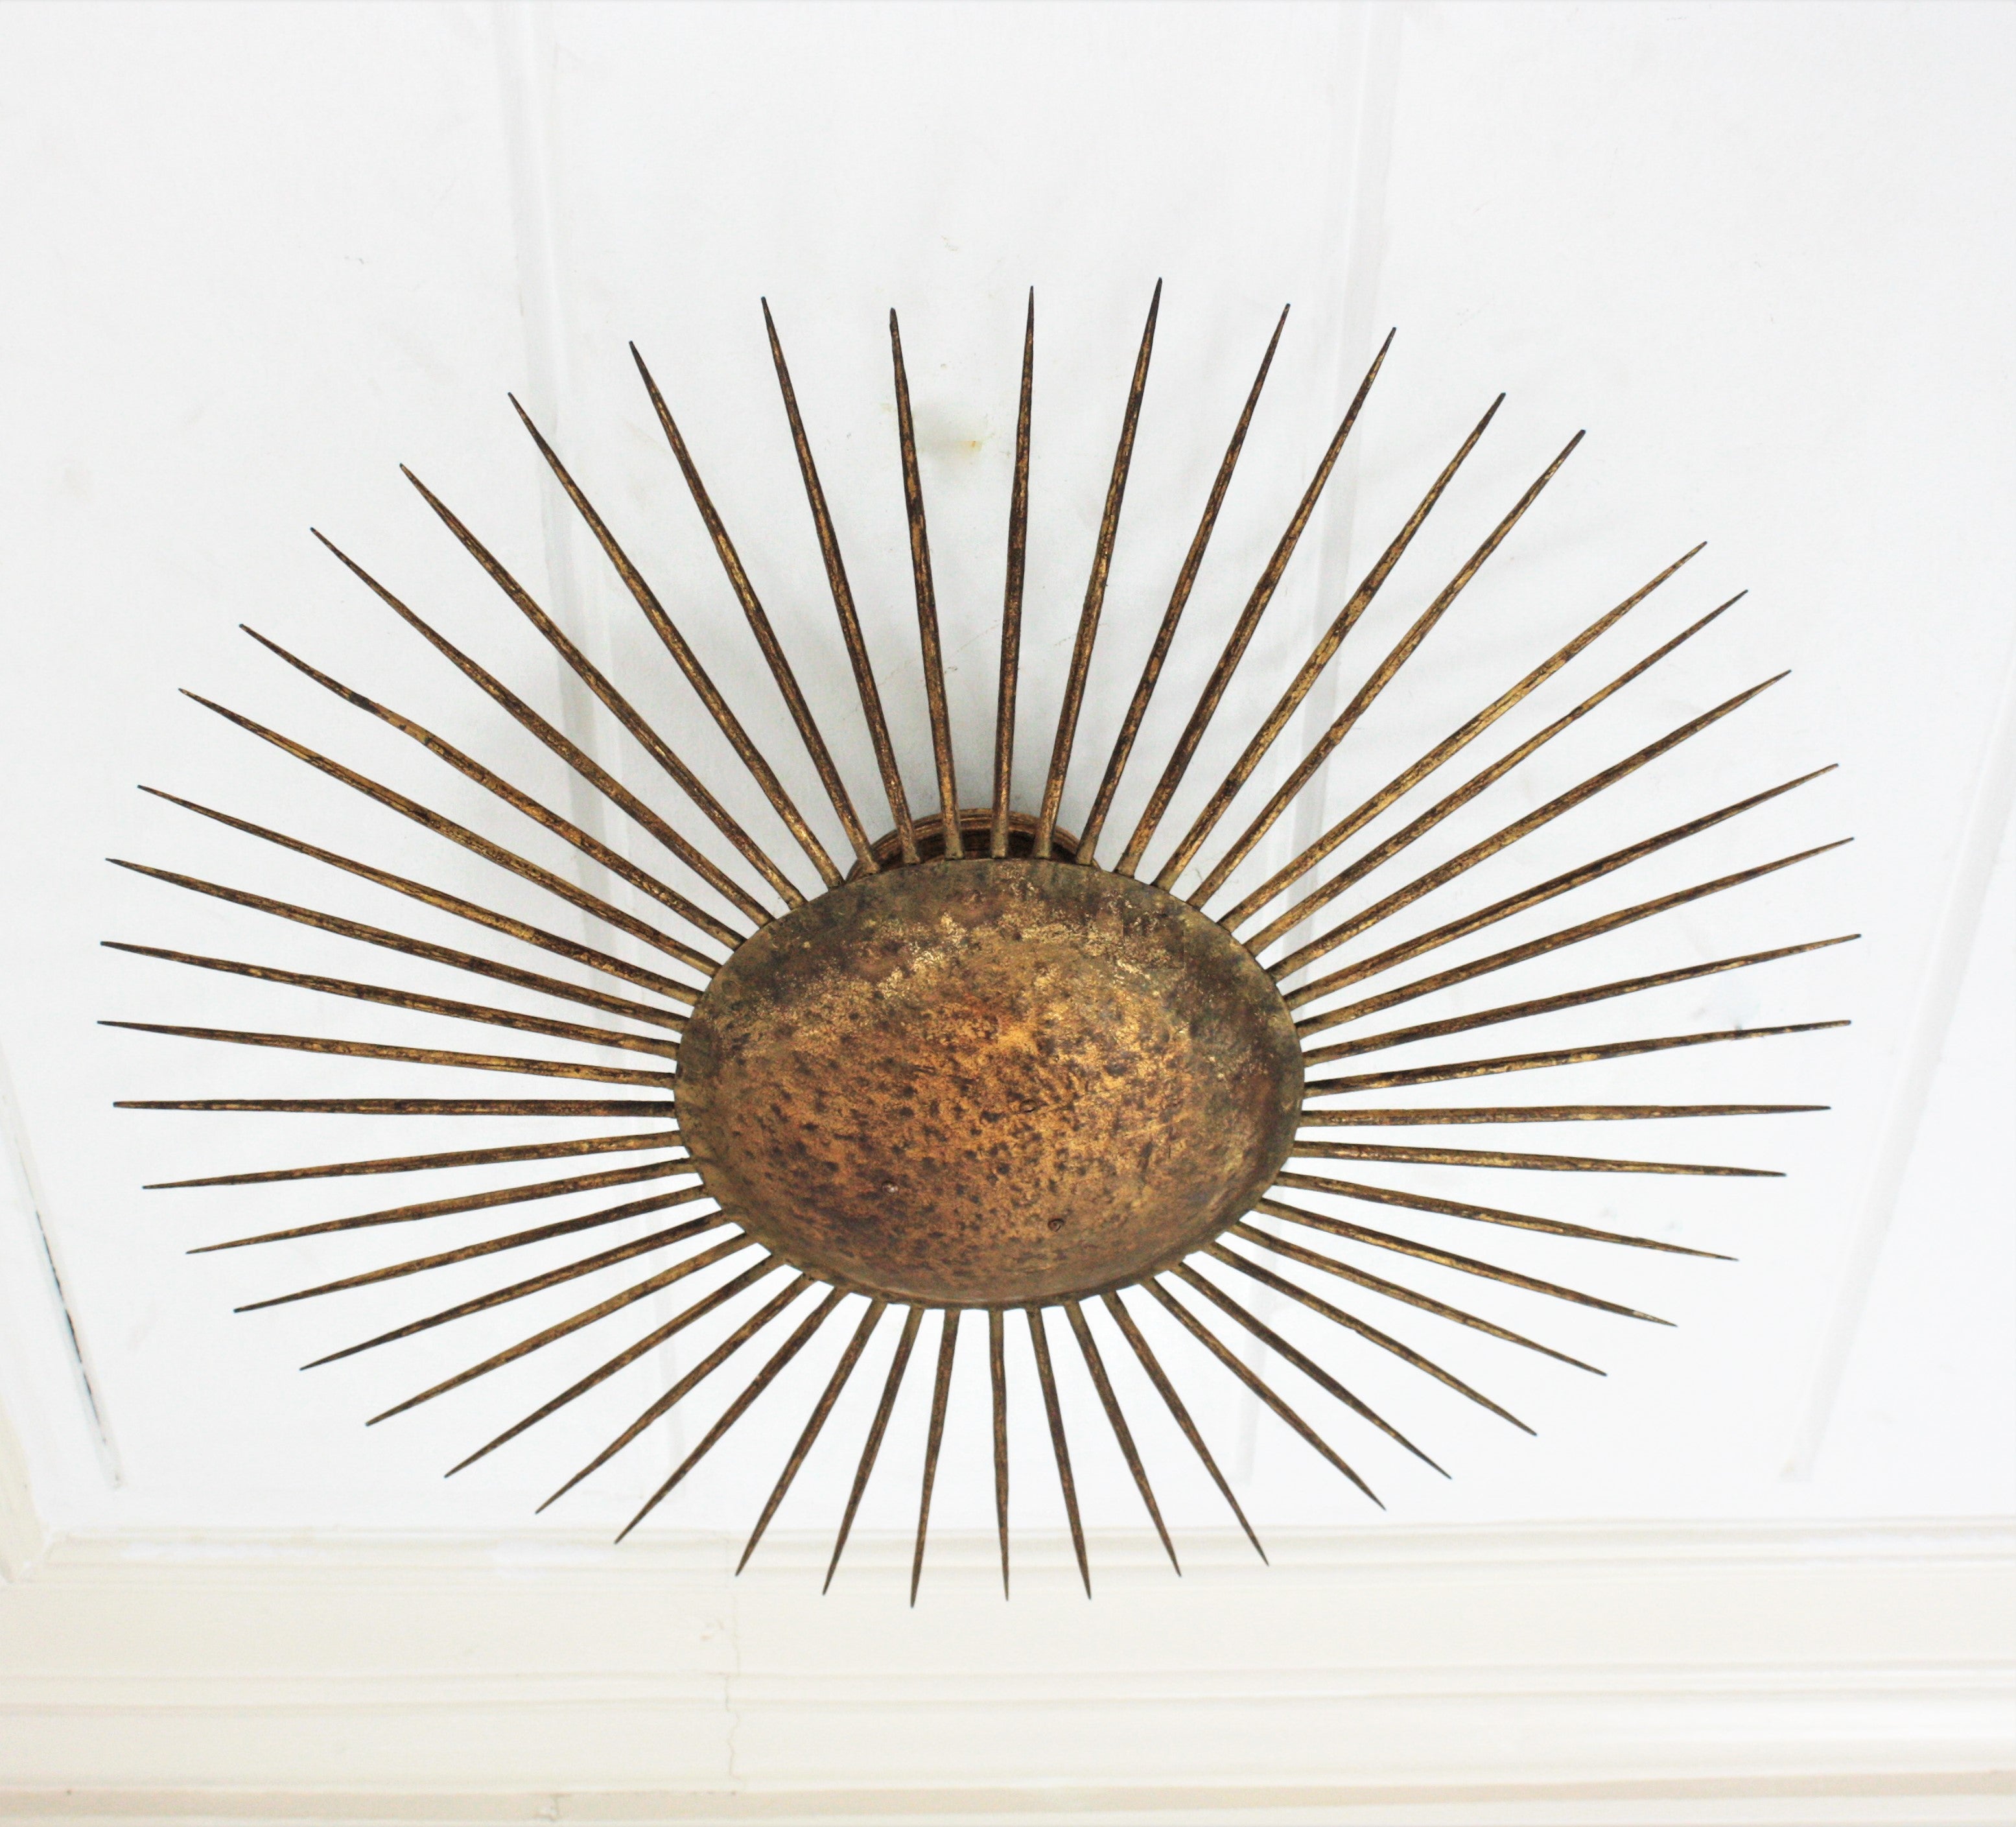 Large Sunburst flush mount, wrought iron, gold leaf, France, 1930s-1940s.
This iron sunburst ceiling flush mount was hancrafted at the late Art Deco period. It has a nice design with pointed spikes surrounding a central spherical plate. Entirely